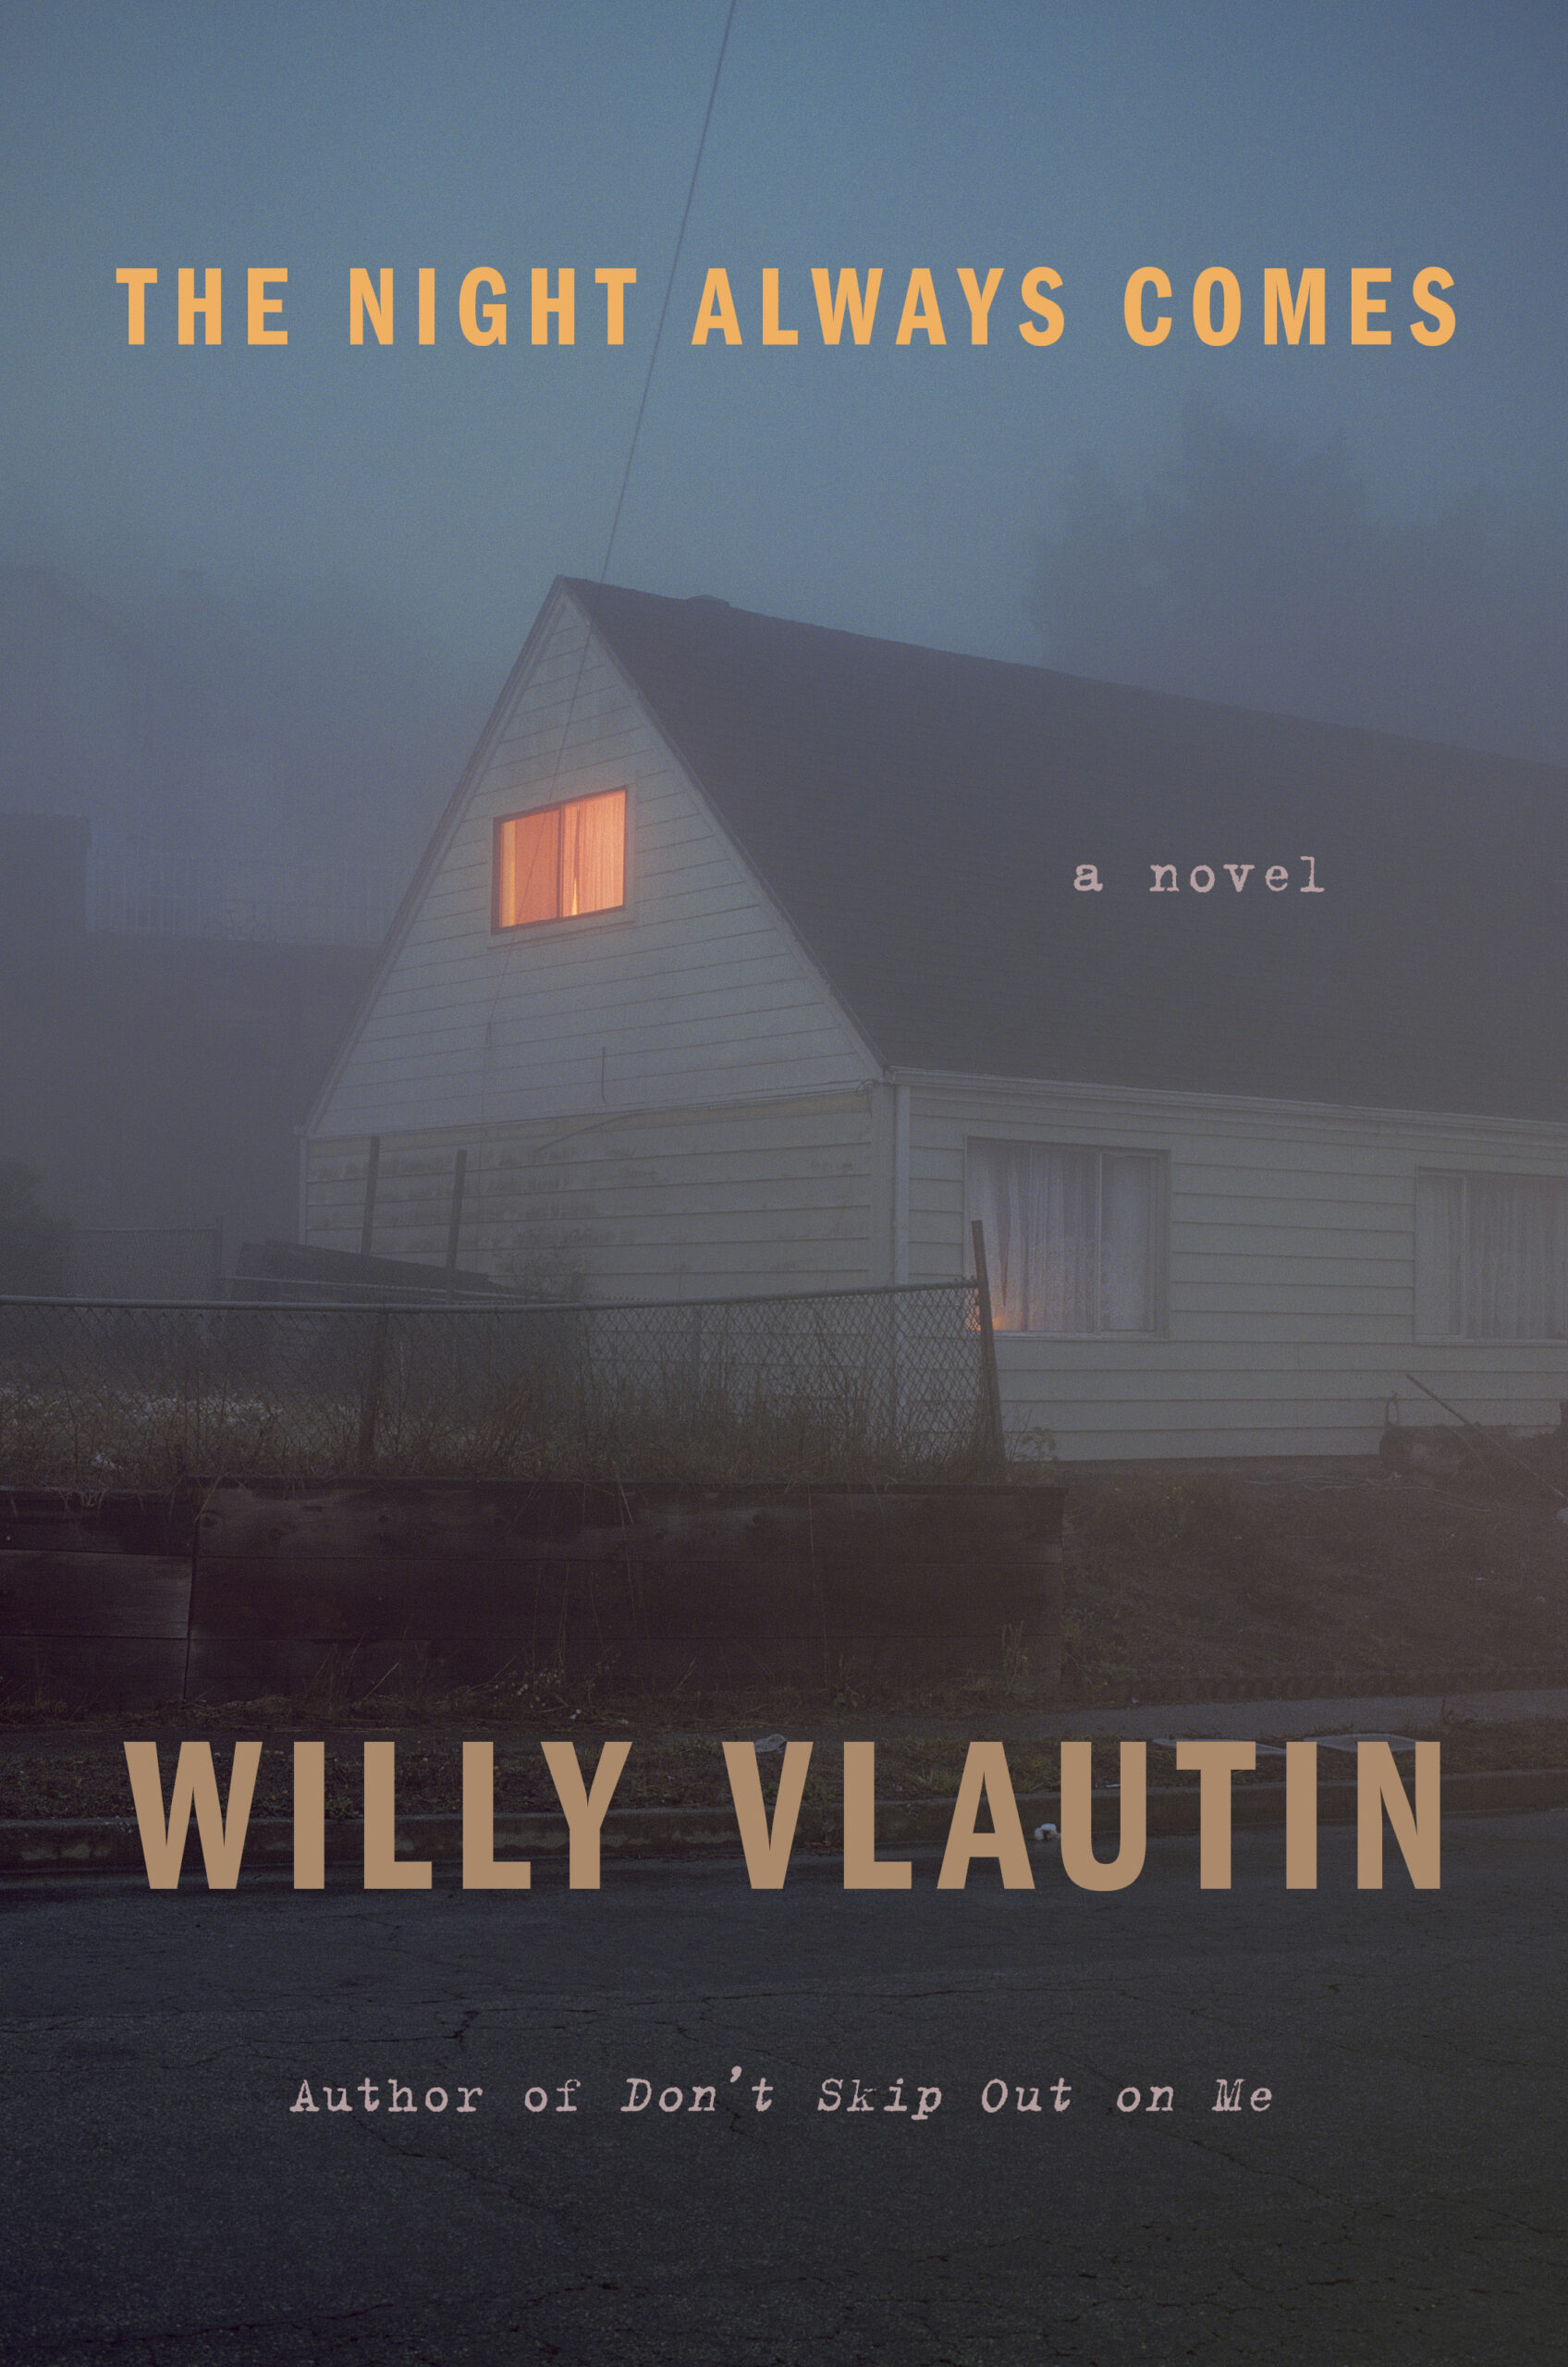 Willy Vlautin Book Cover